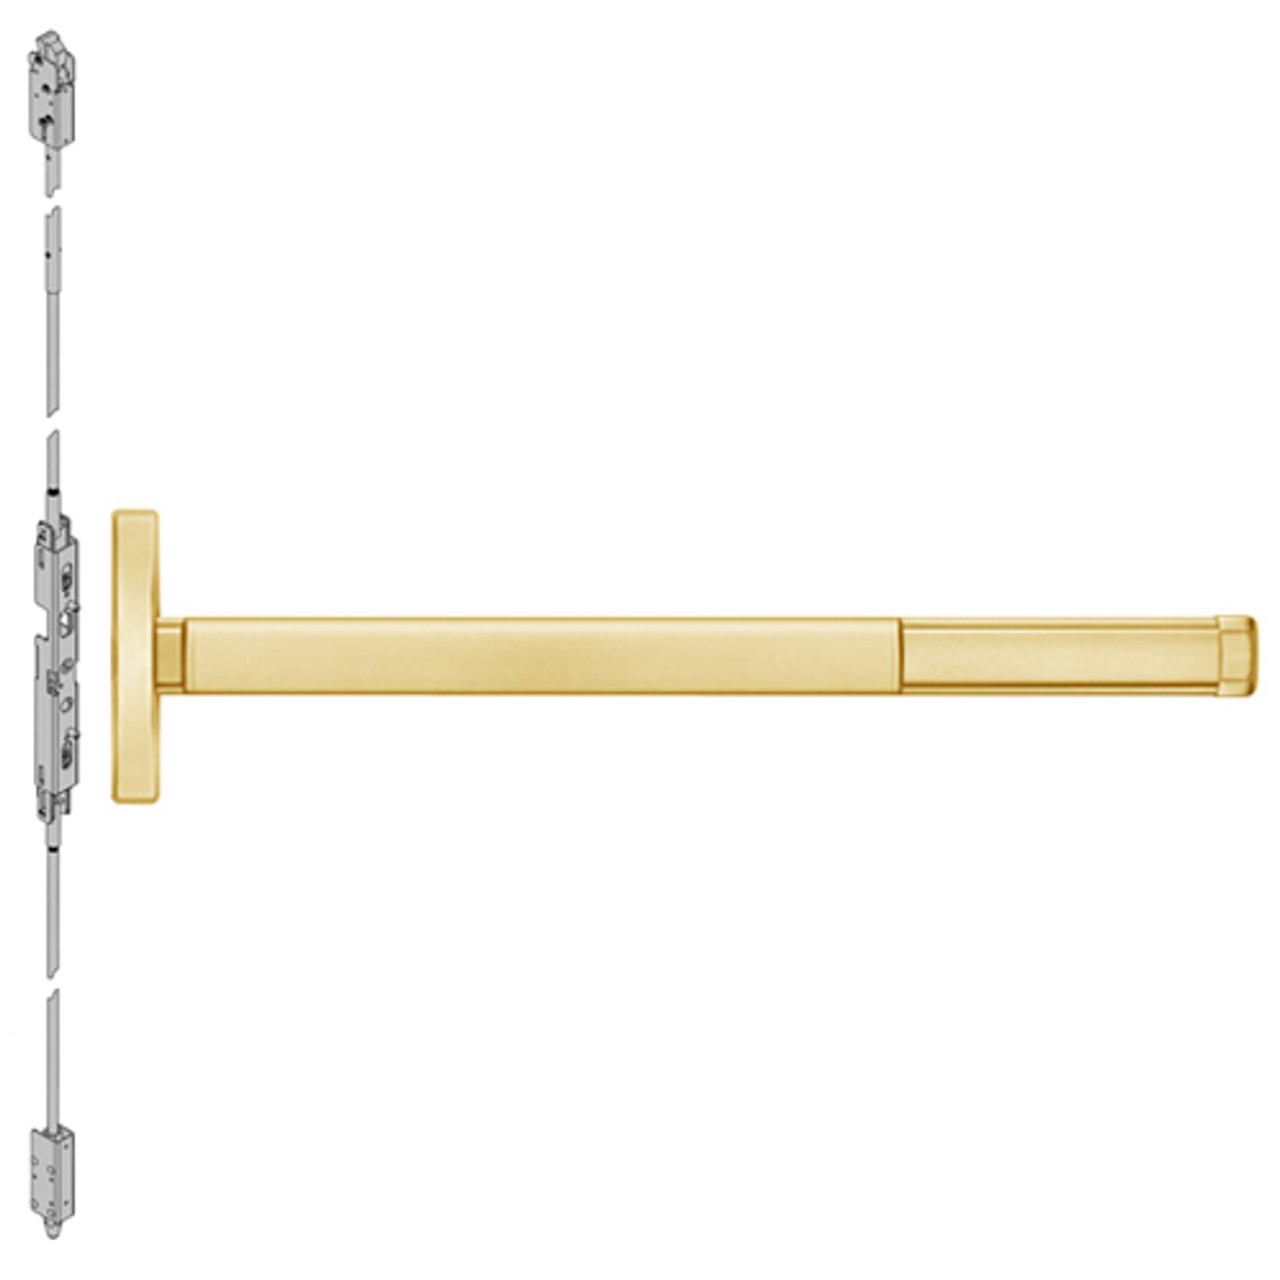 DEFL2608LBR-605-36 PHI 2600 Series Fire Rated Concealed Vertical Rod Exit Device with Delayed Egress Prepped for Key Controls Lever in Bright Brass Finish